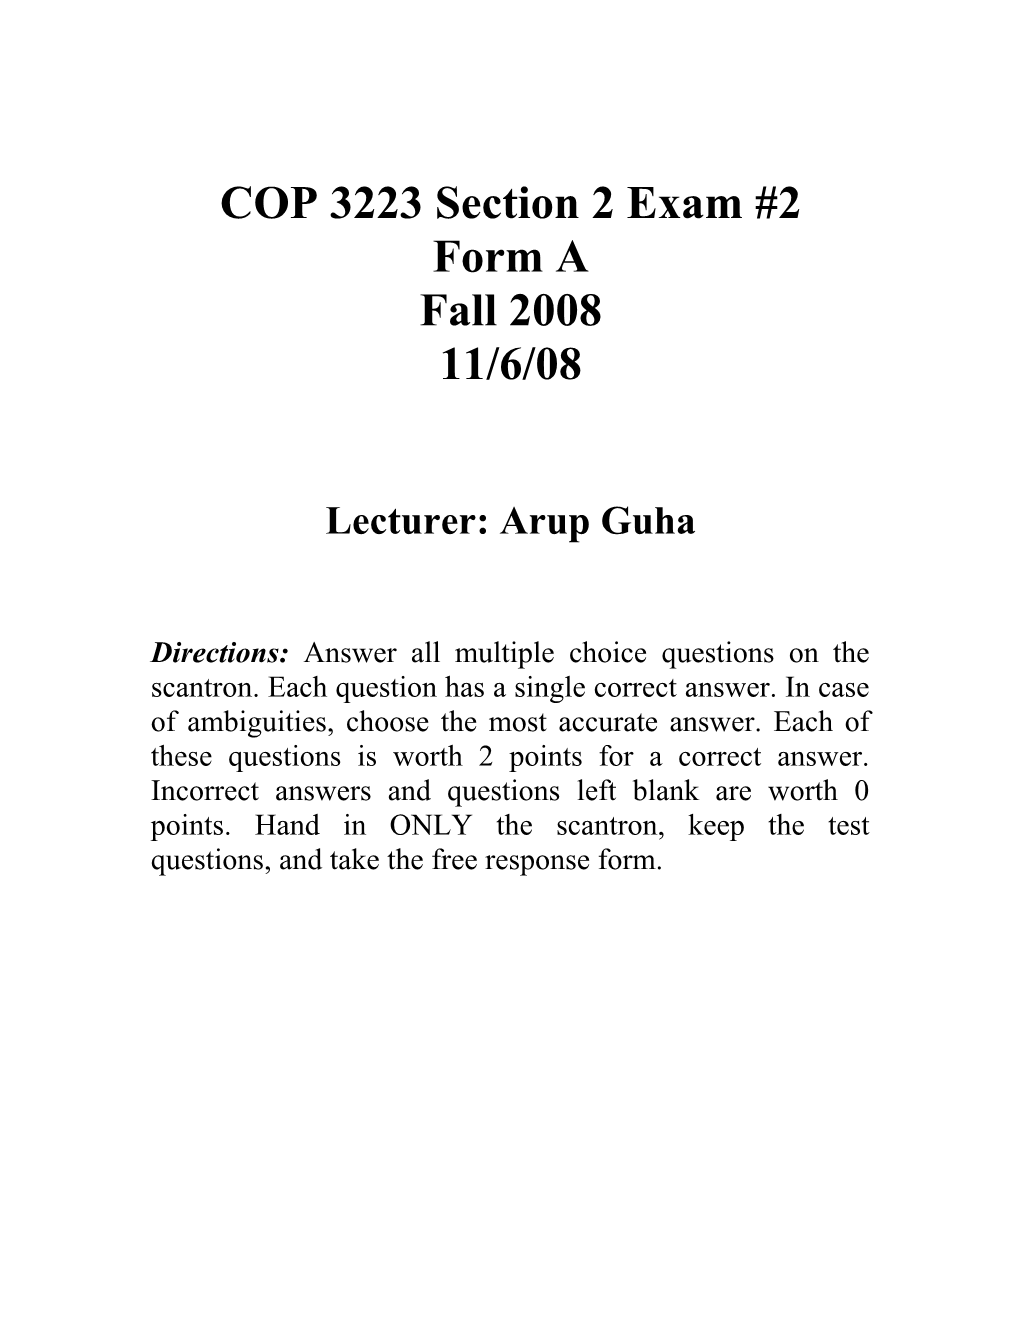 COP 3223 Section 2 Exam #2